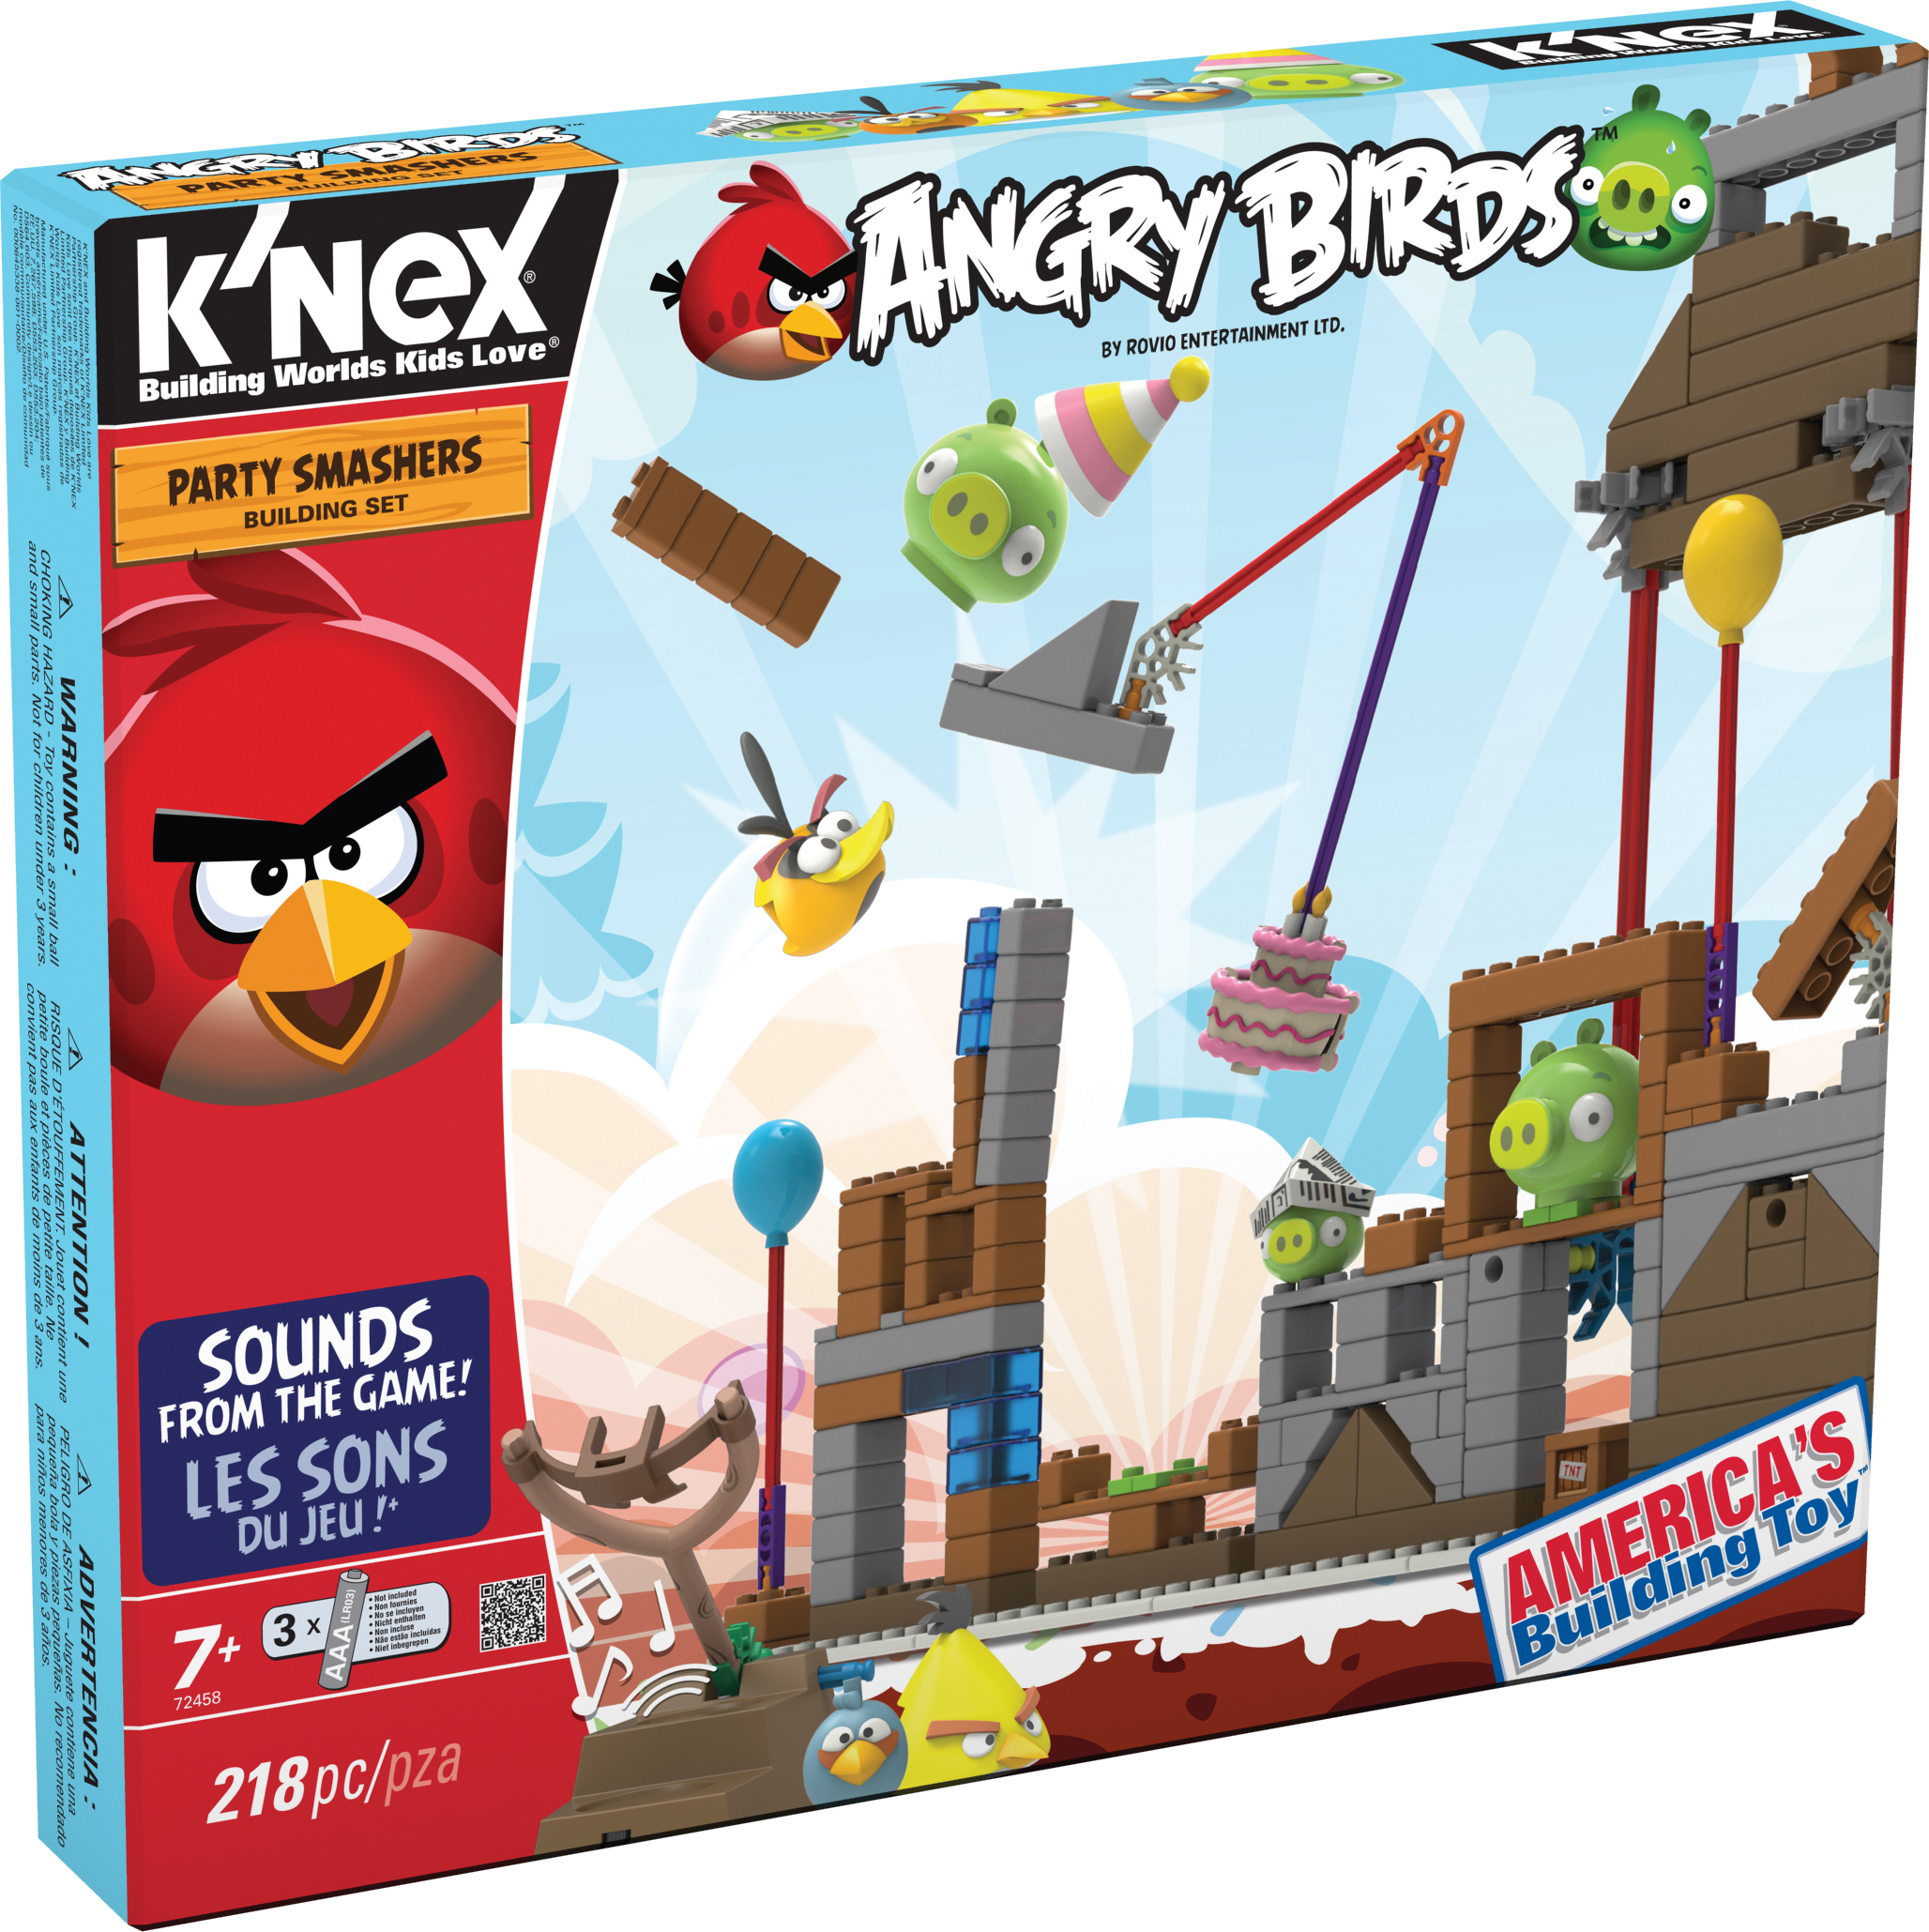 angry birds seasons 1.5 1 patch